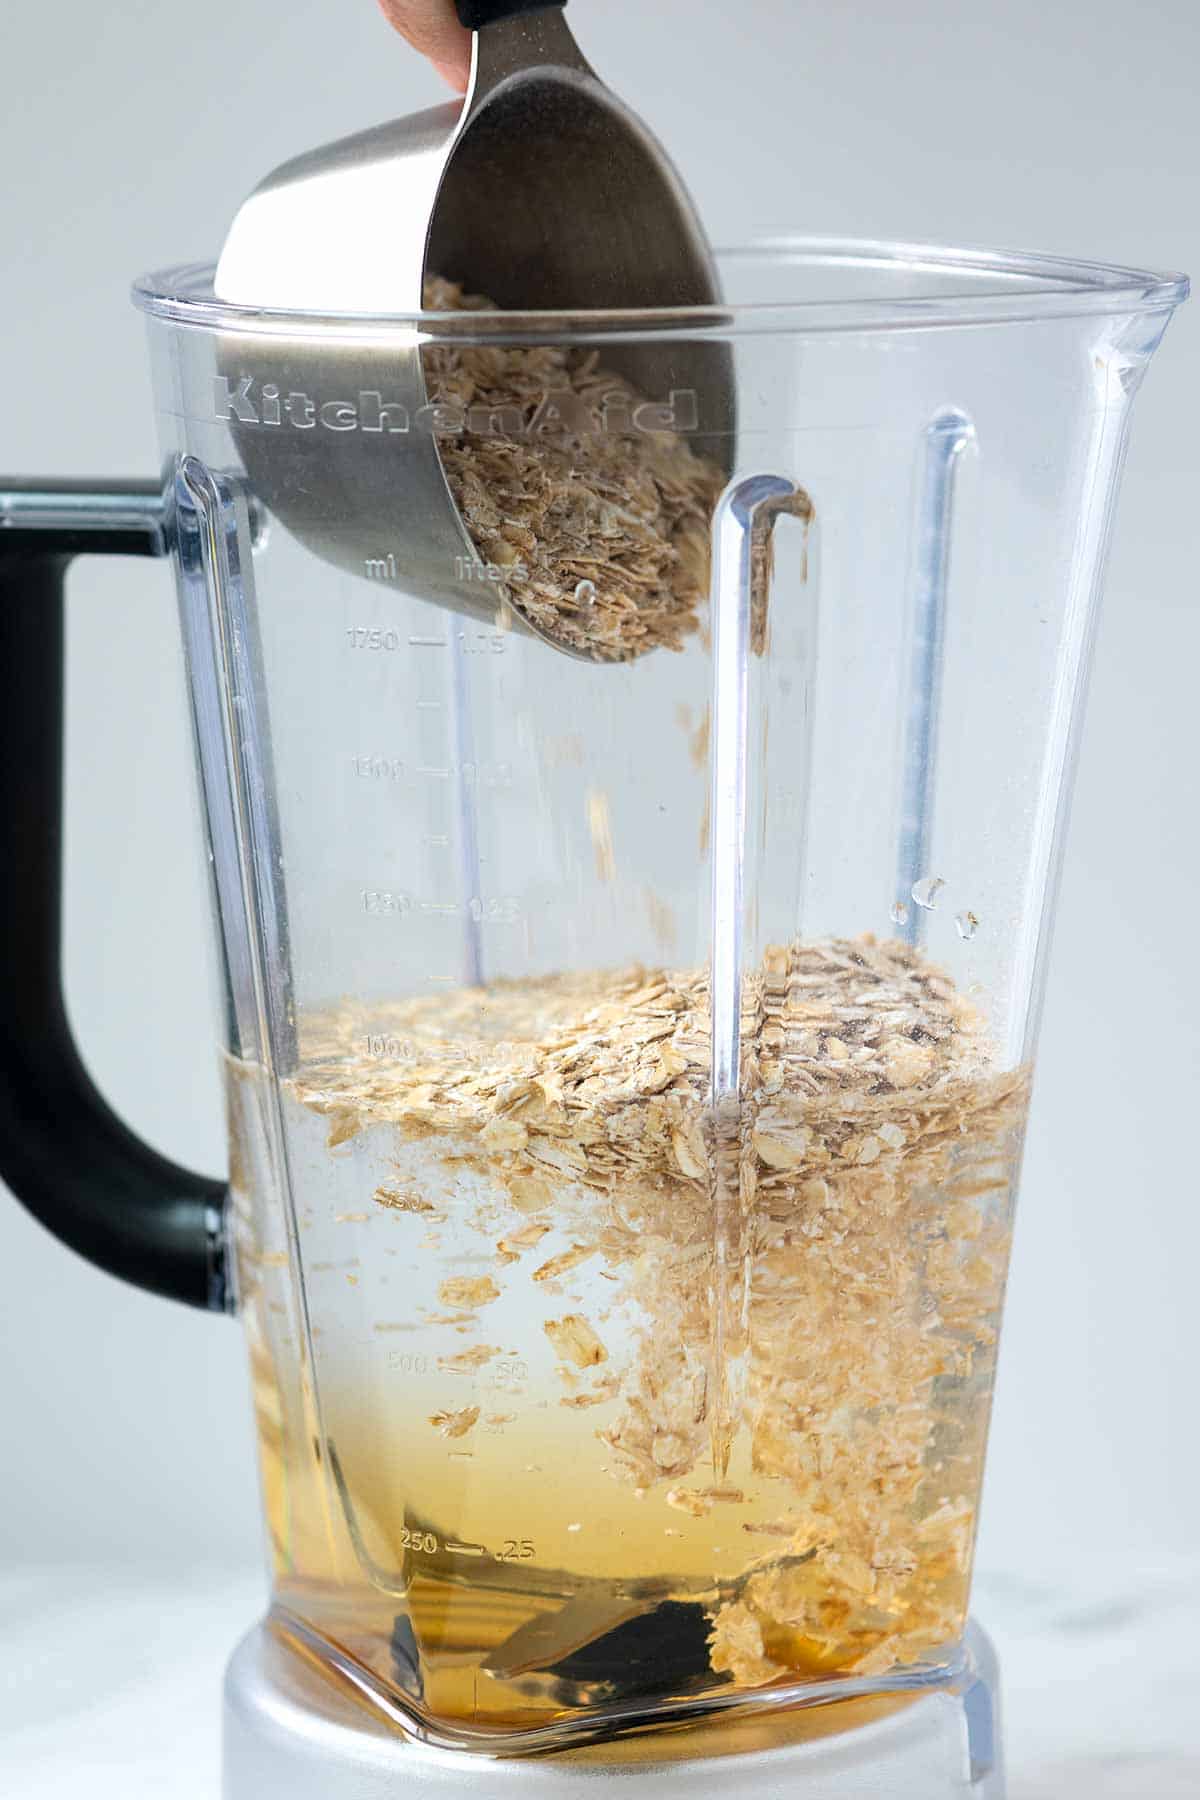 Cold water, maple syrup, a pinch of salt, and rolled oats in a blender